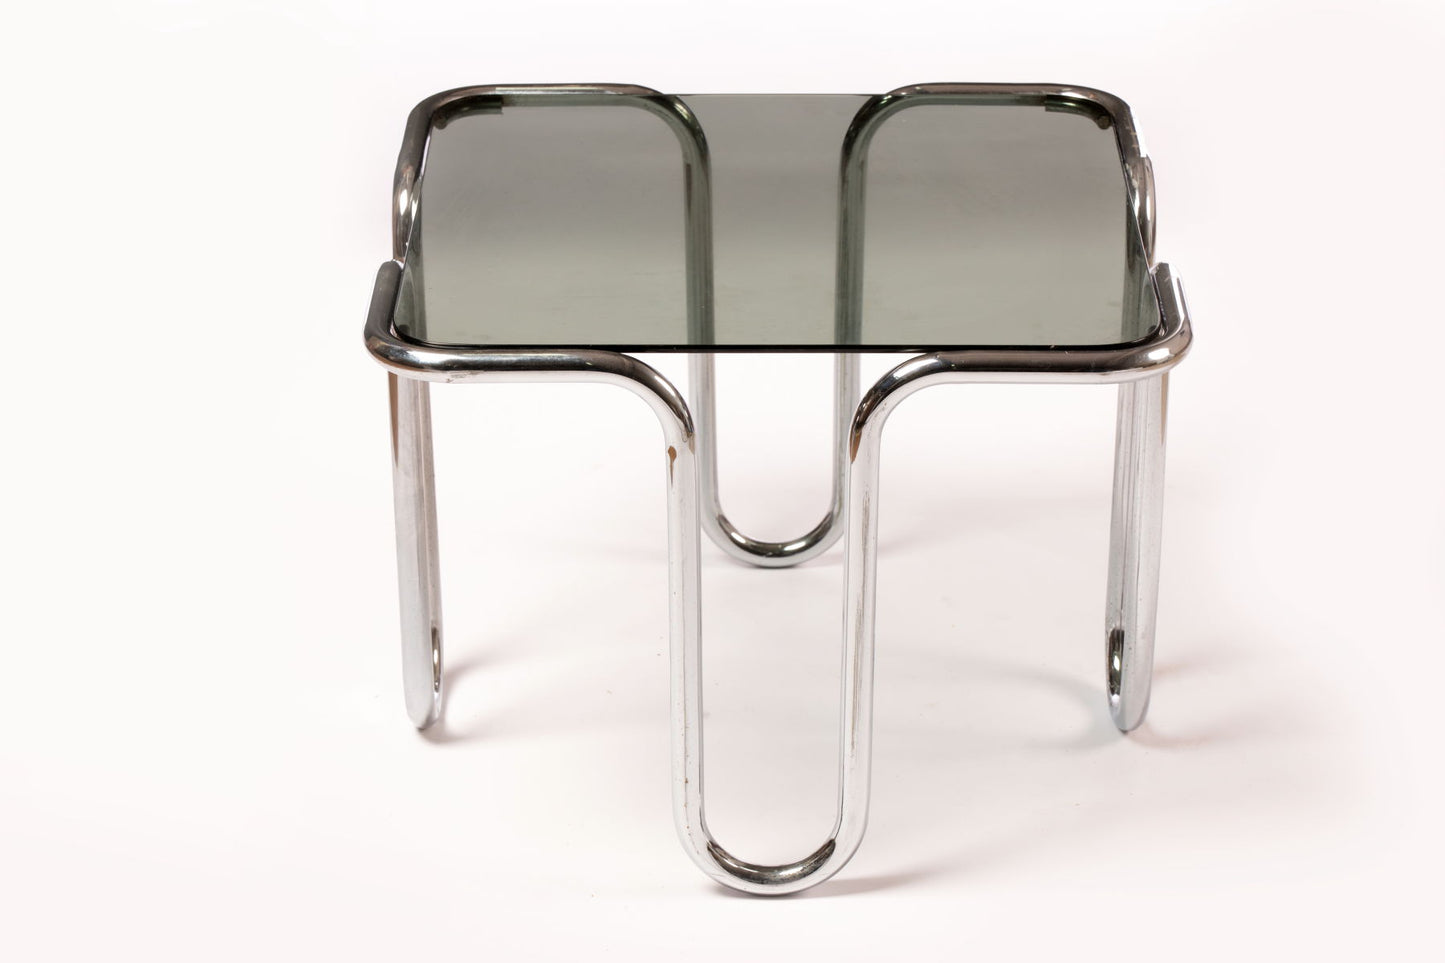 Rounded tubular steel living room table from the 70s